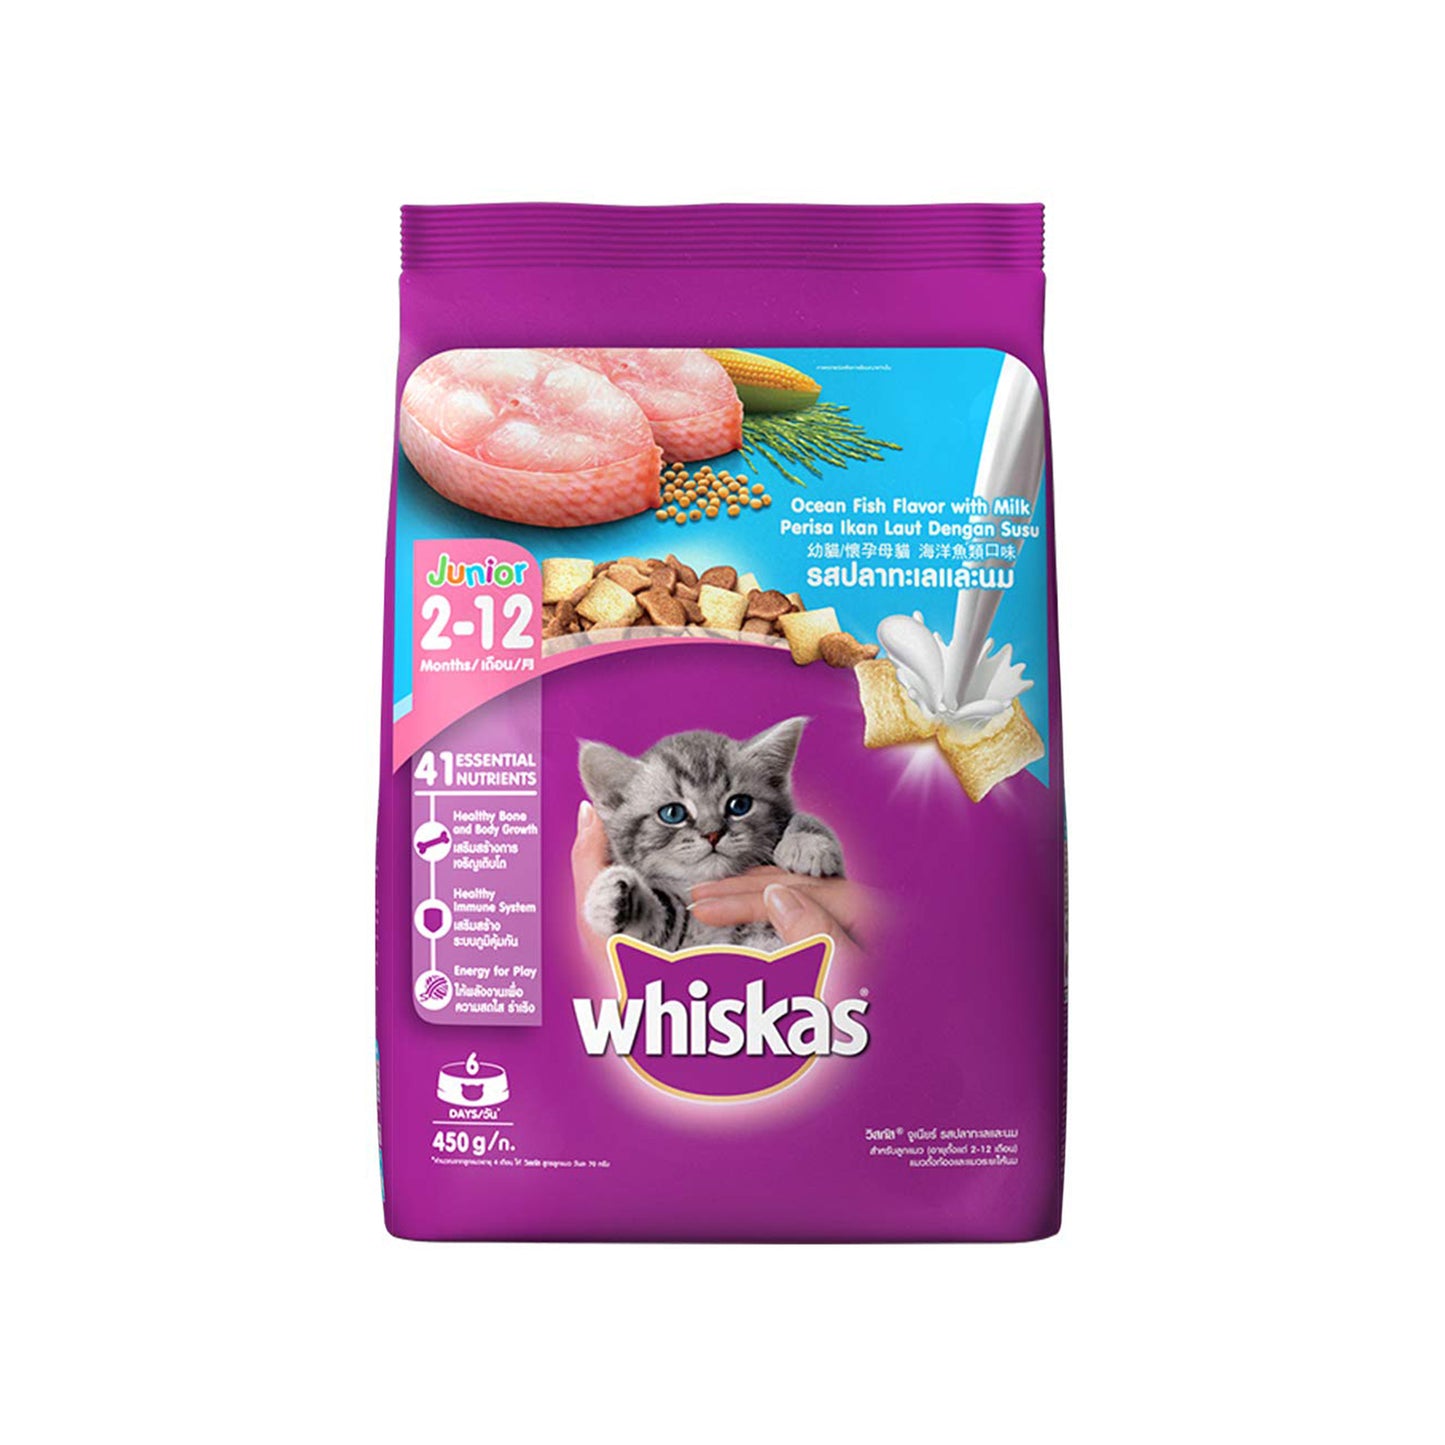 Whiskas - Dry Cat Food Ocean Fish Flavour For Kittens (2-12 months)